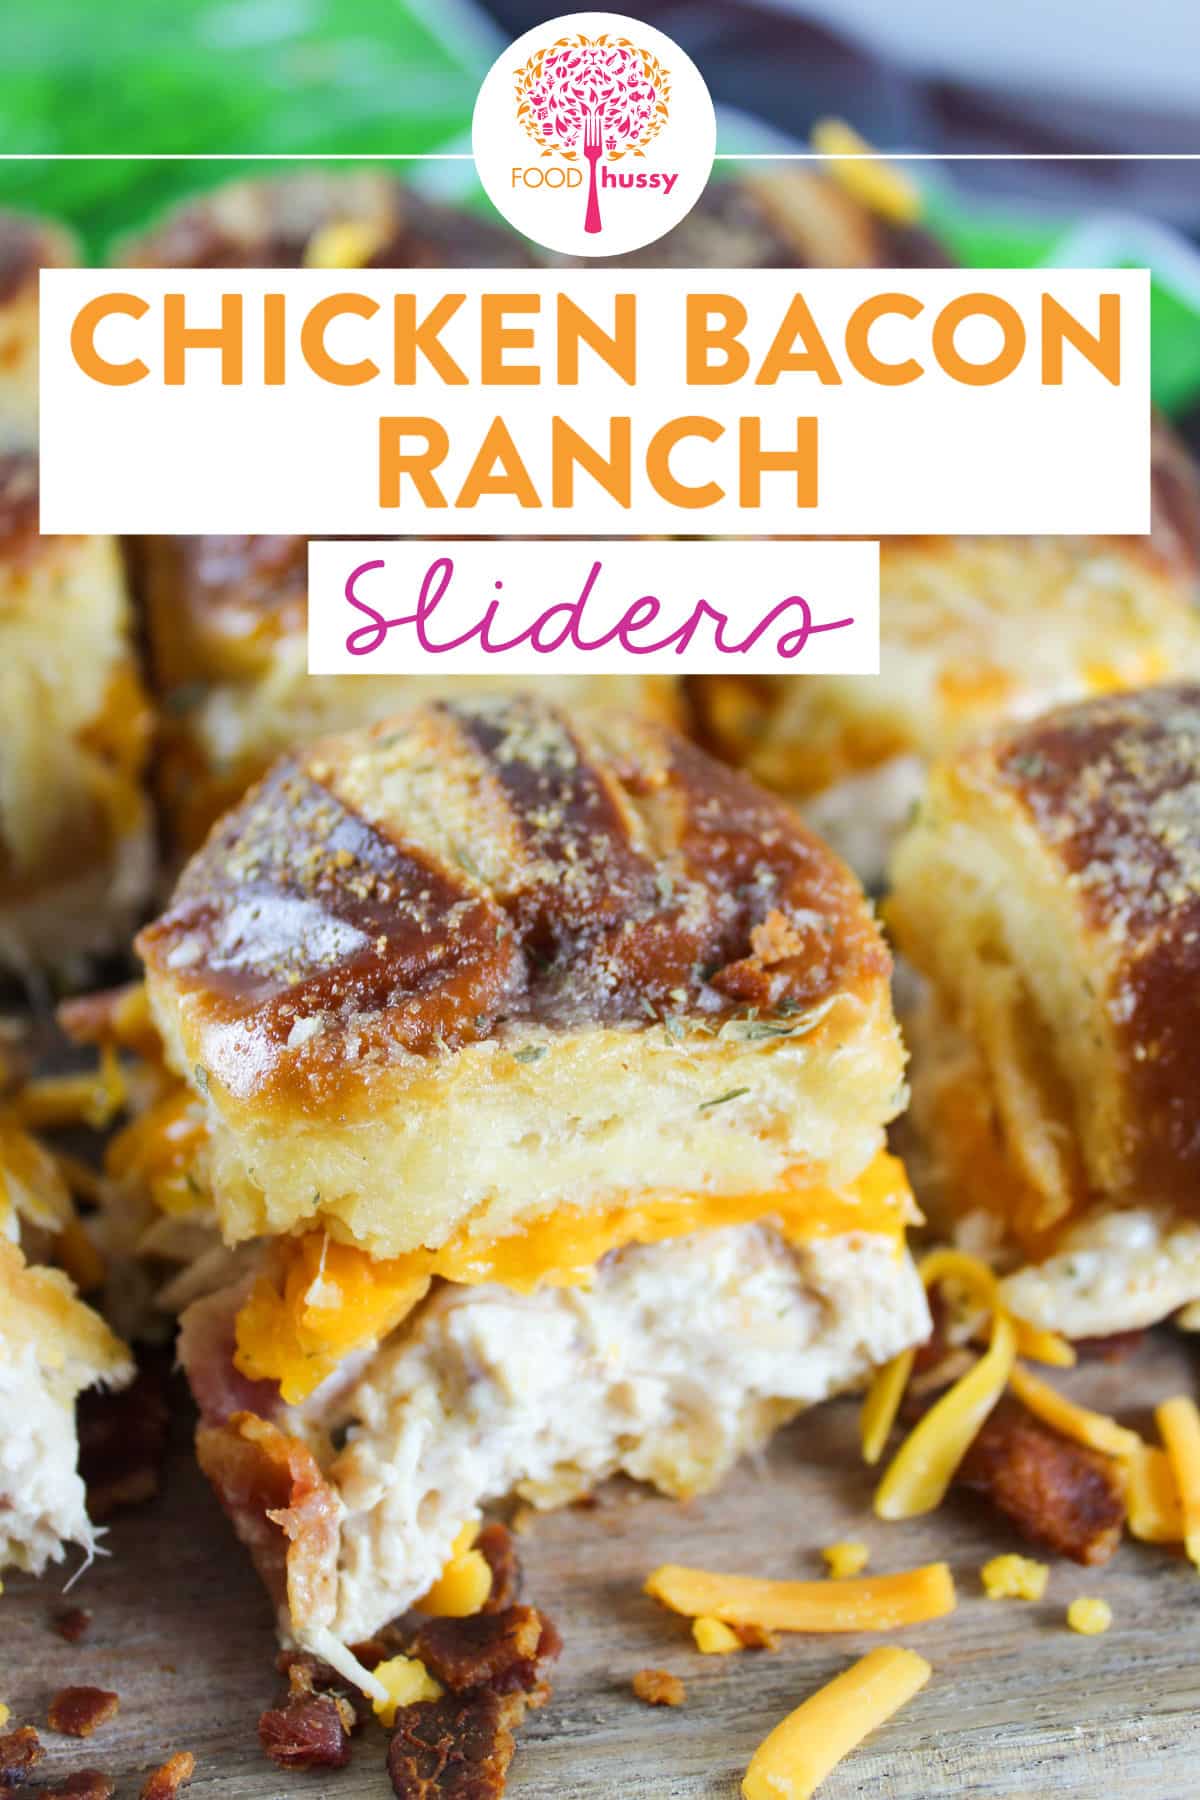 These Chicken Bacon Ranch Sliders are so tasty! Full of rotisserie chicken, melty cheddar cheese, smoky bacon and creamy ranch dressing! These sliders are great for a weeknight dinner or a potluck with friends.  via @foodhussy